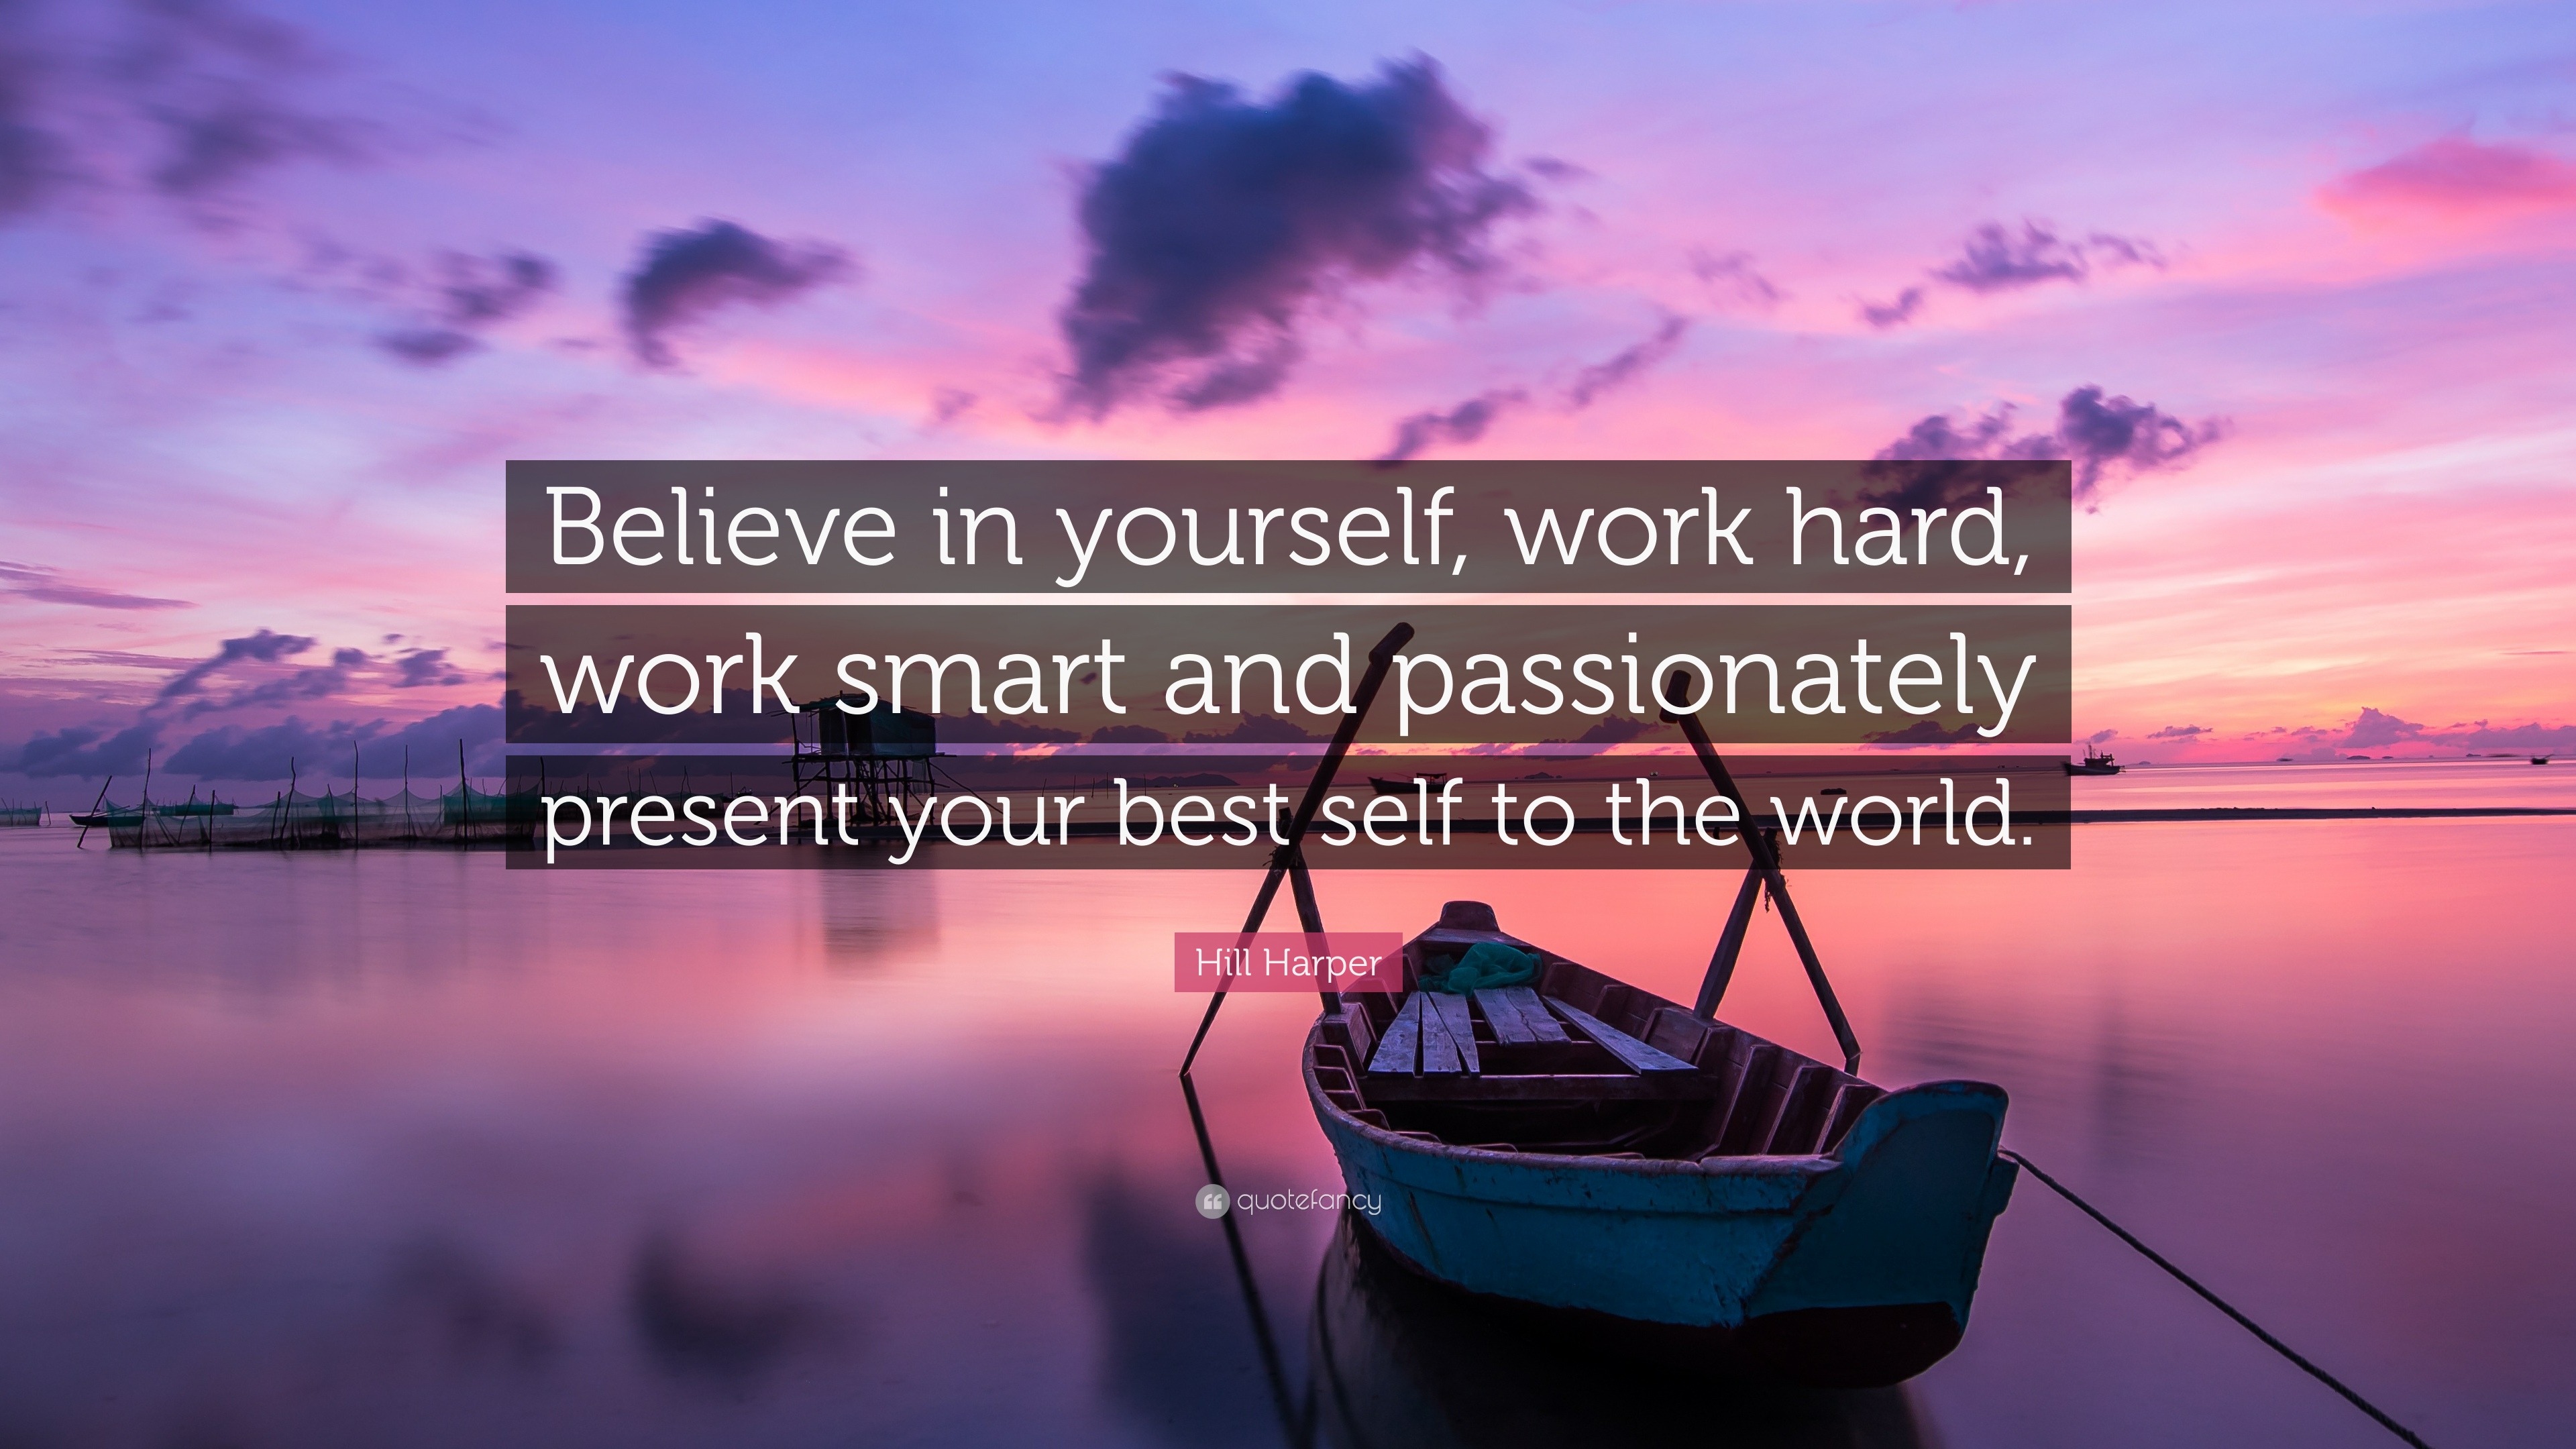 Hill Harper Quote: “Believe In Yourself, Work Hard, Work Smart And